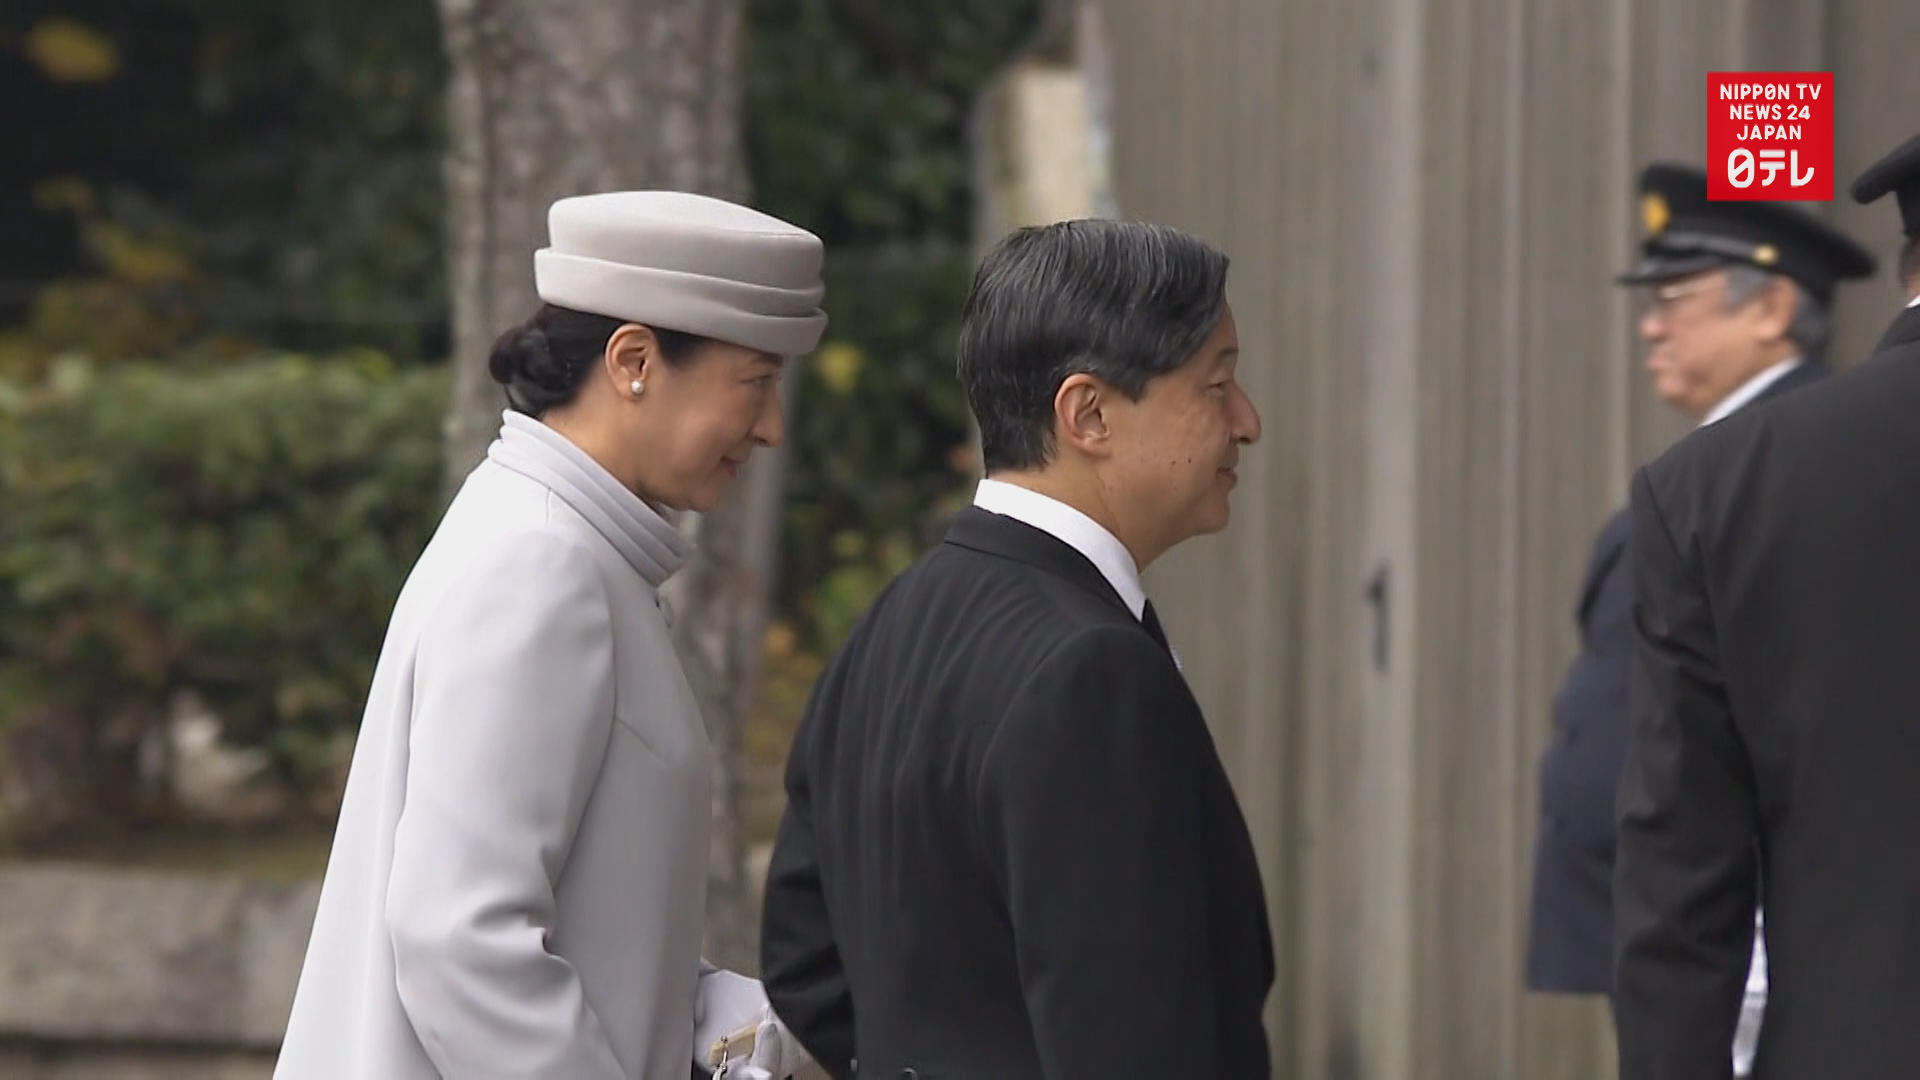 Imperial couple visits mausoleum of 1st emperor